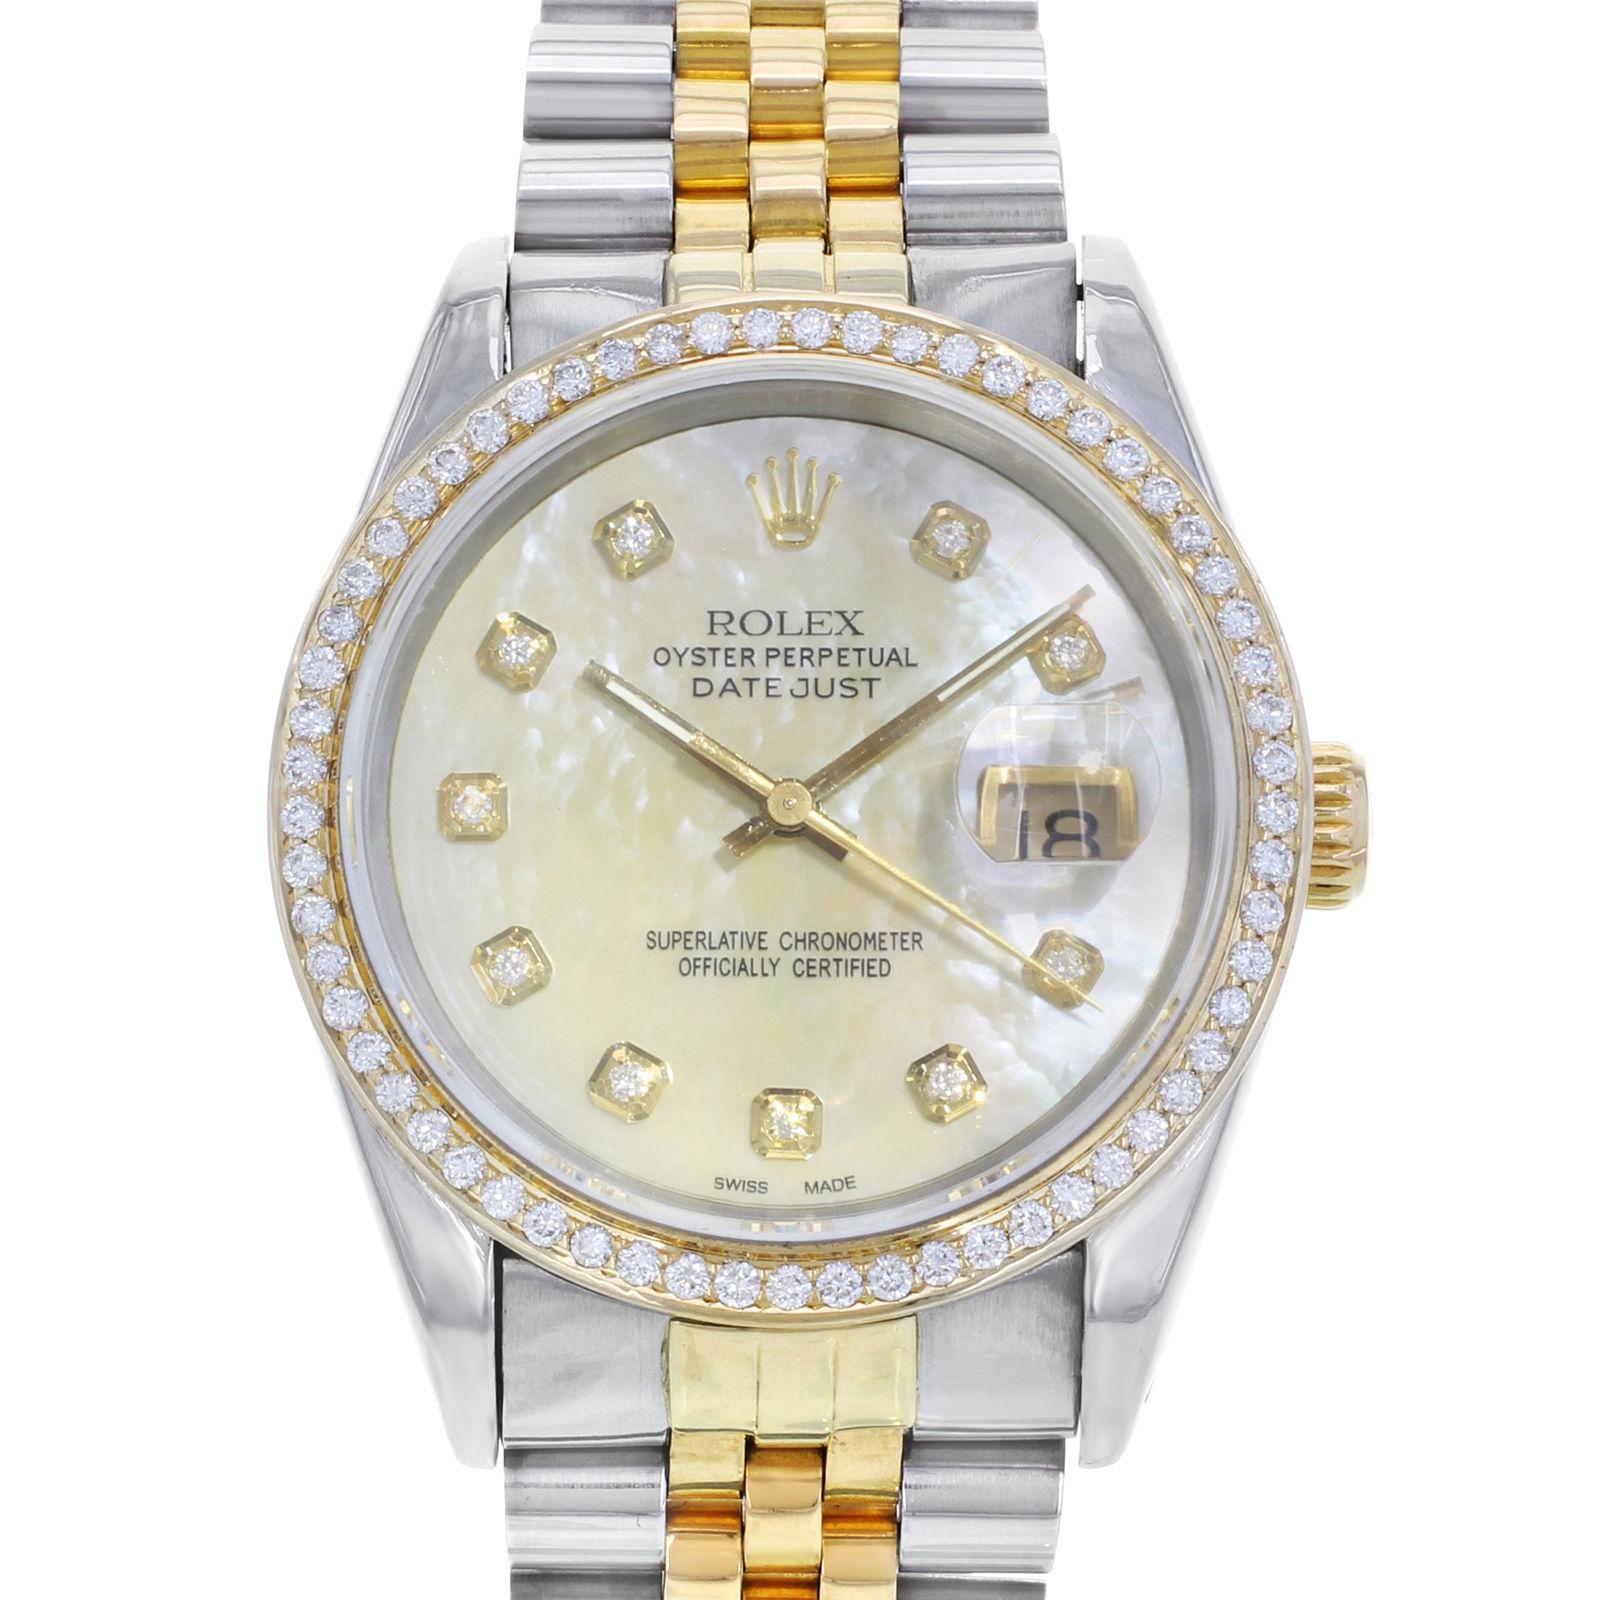 (20773)
This pre-owned Rolex Datejust 16233 is a beautiful men's timepiece that is powered by an automatic movement which is cased in a stainless steel case. It has a round shape face, date, diamonds dial, and has hand diamonds style markers. It is